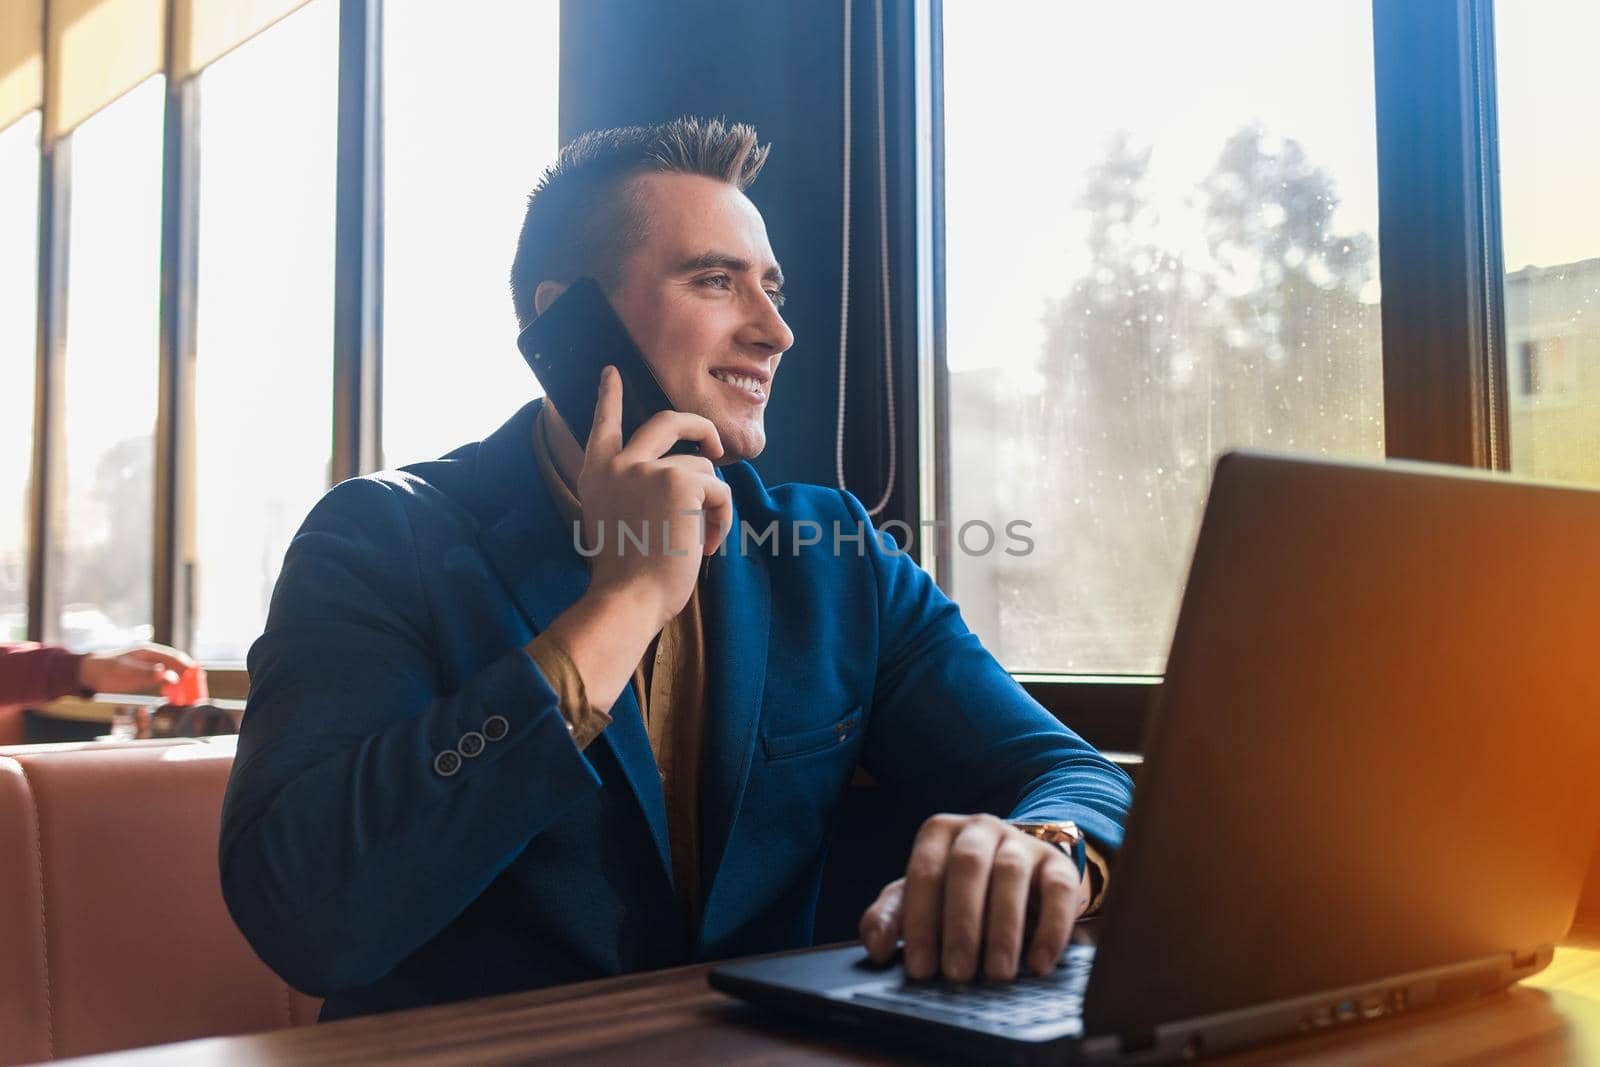 A business man stylish positive smiling businessman in an attractive European-looking suit works in a laptop, talks on a cell or mobile phone, sitting at a table in a cafe by the window.